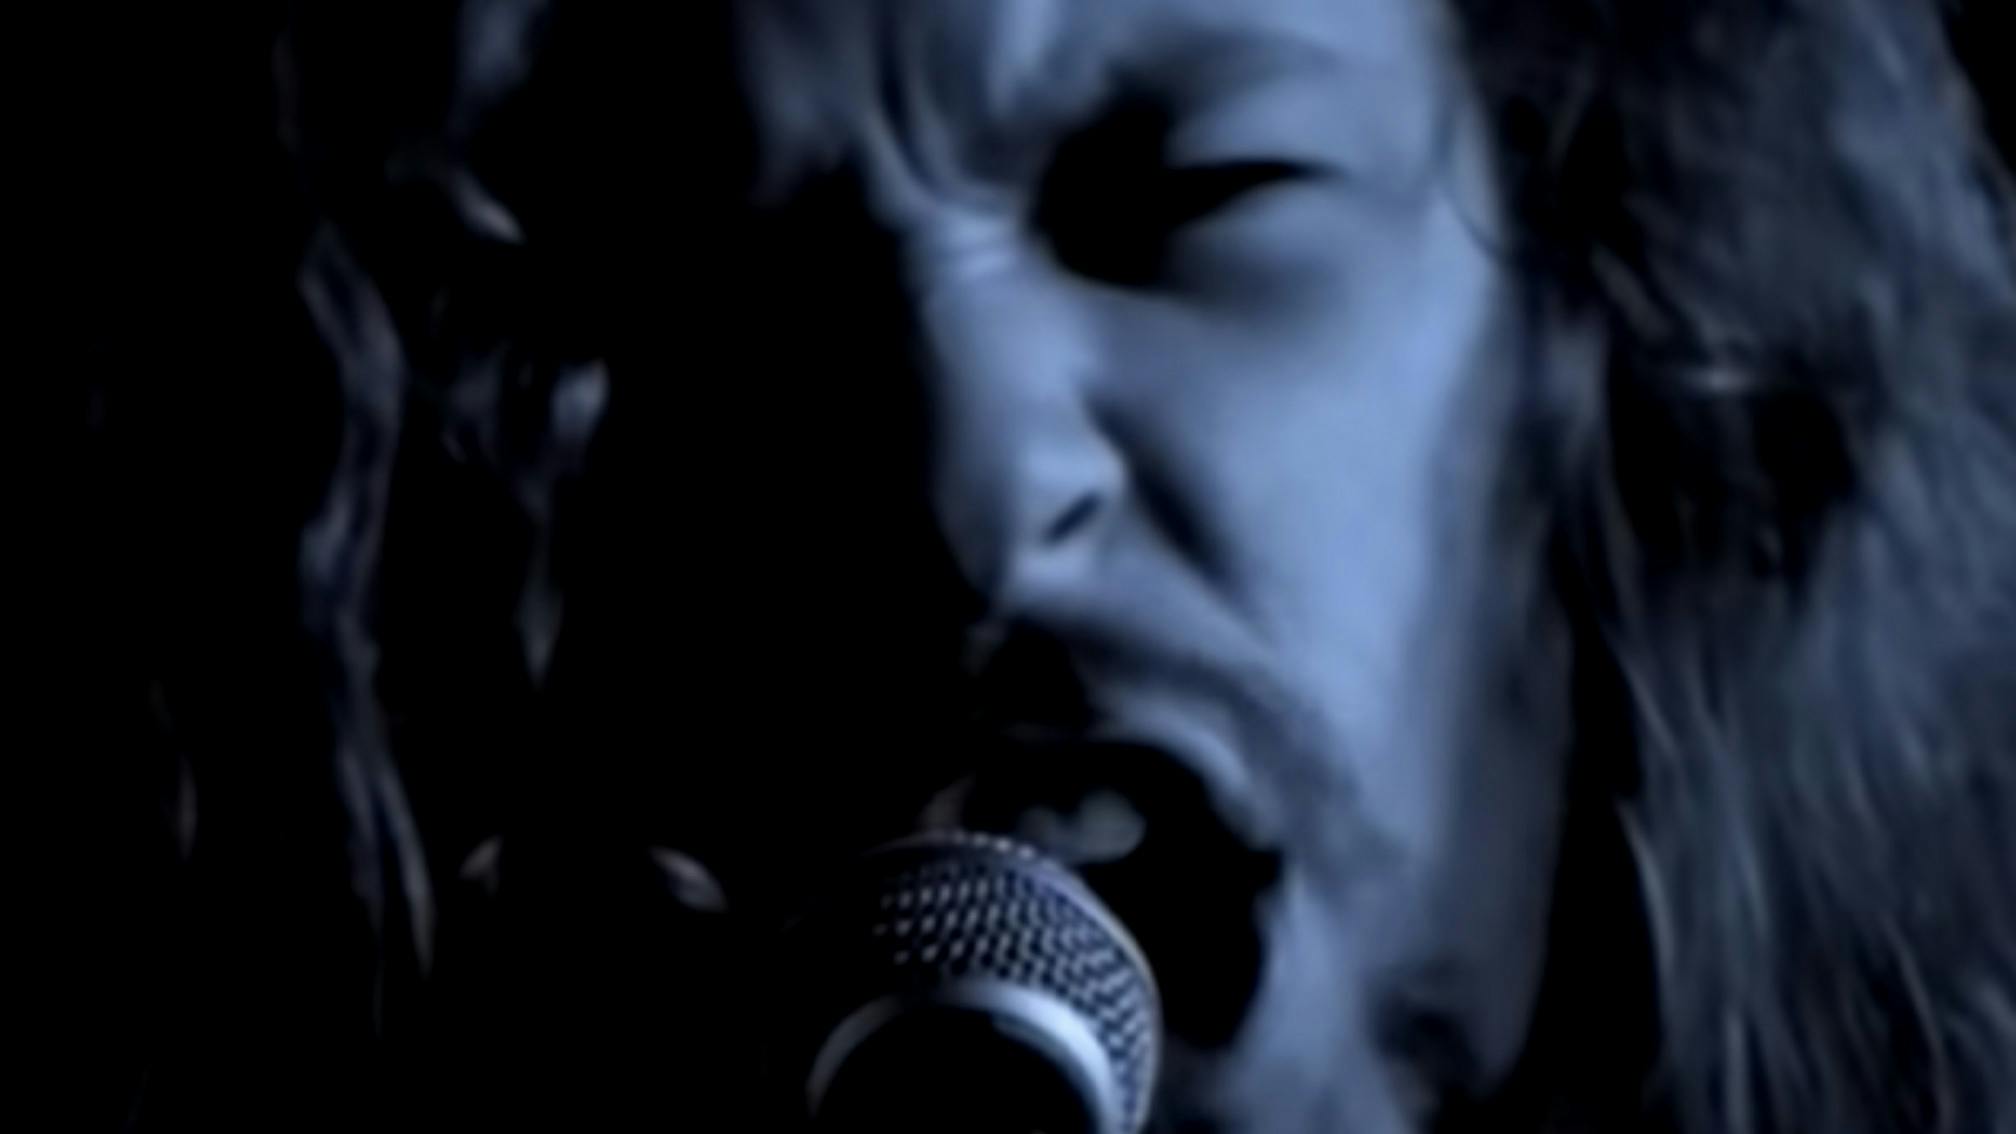 How the video for Metallica's One left me scarred for life